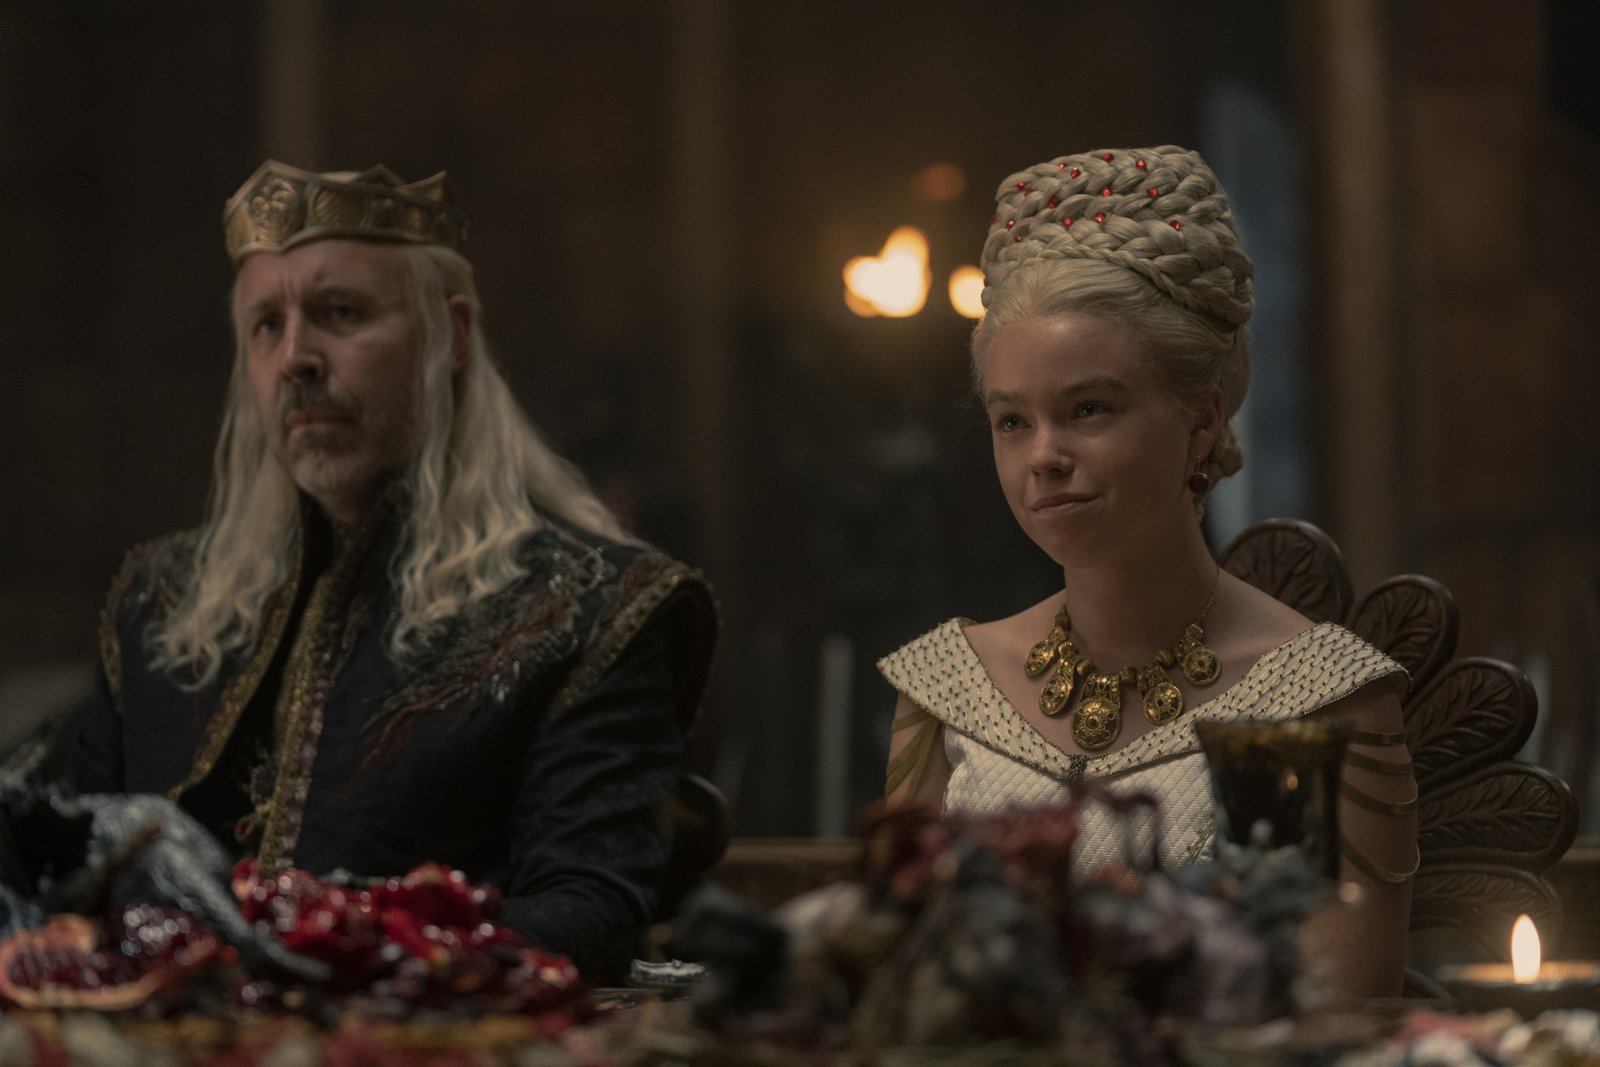 Paddy Considine and Milly Alcock as King Viserys and Princess Rhaenyra in 'House of the Dragon' Episode 5. They're both wearing finery, and Viserys has his crown on. They're sitting next to one another at a table.